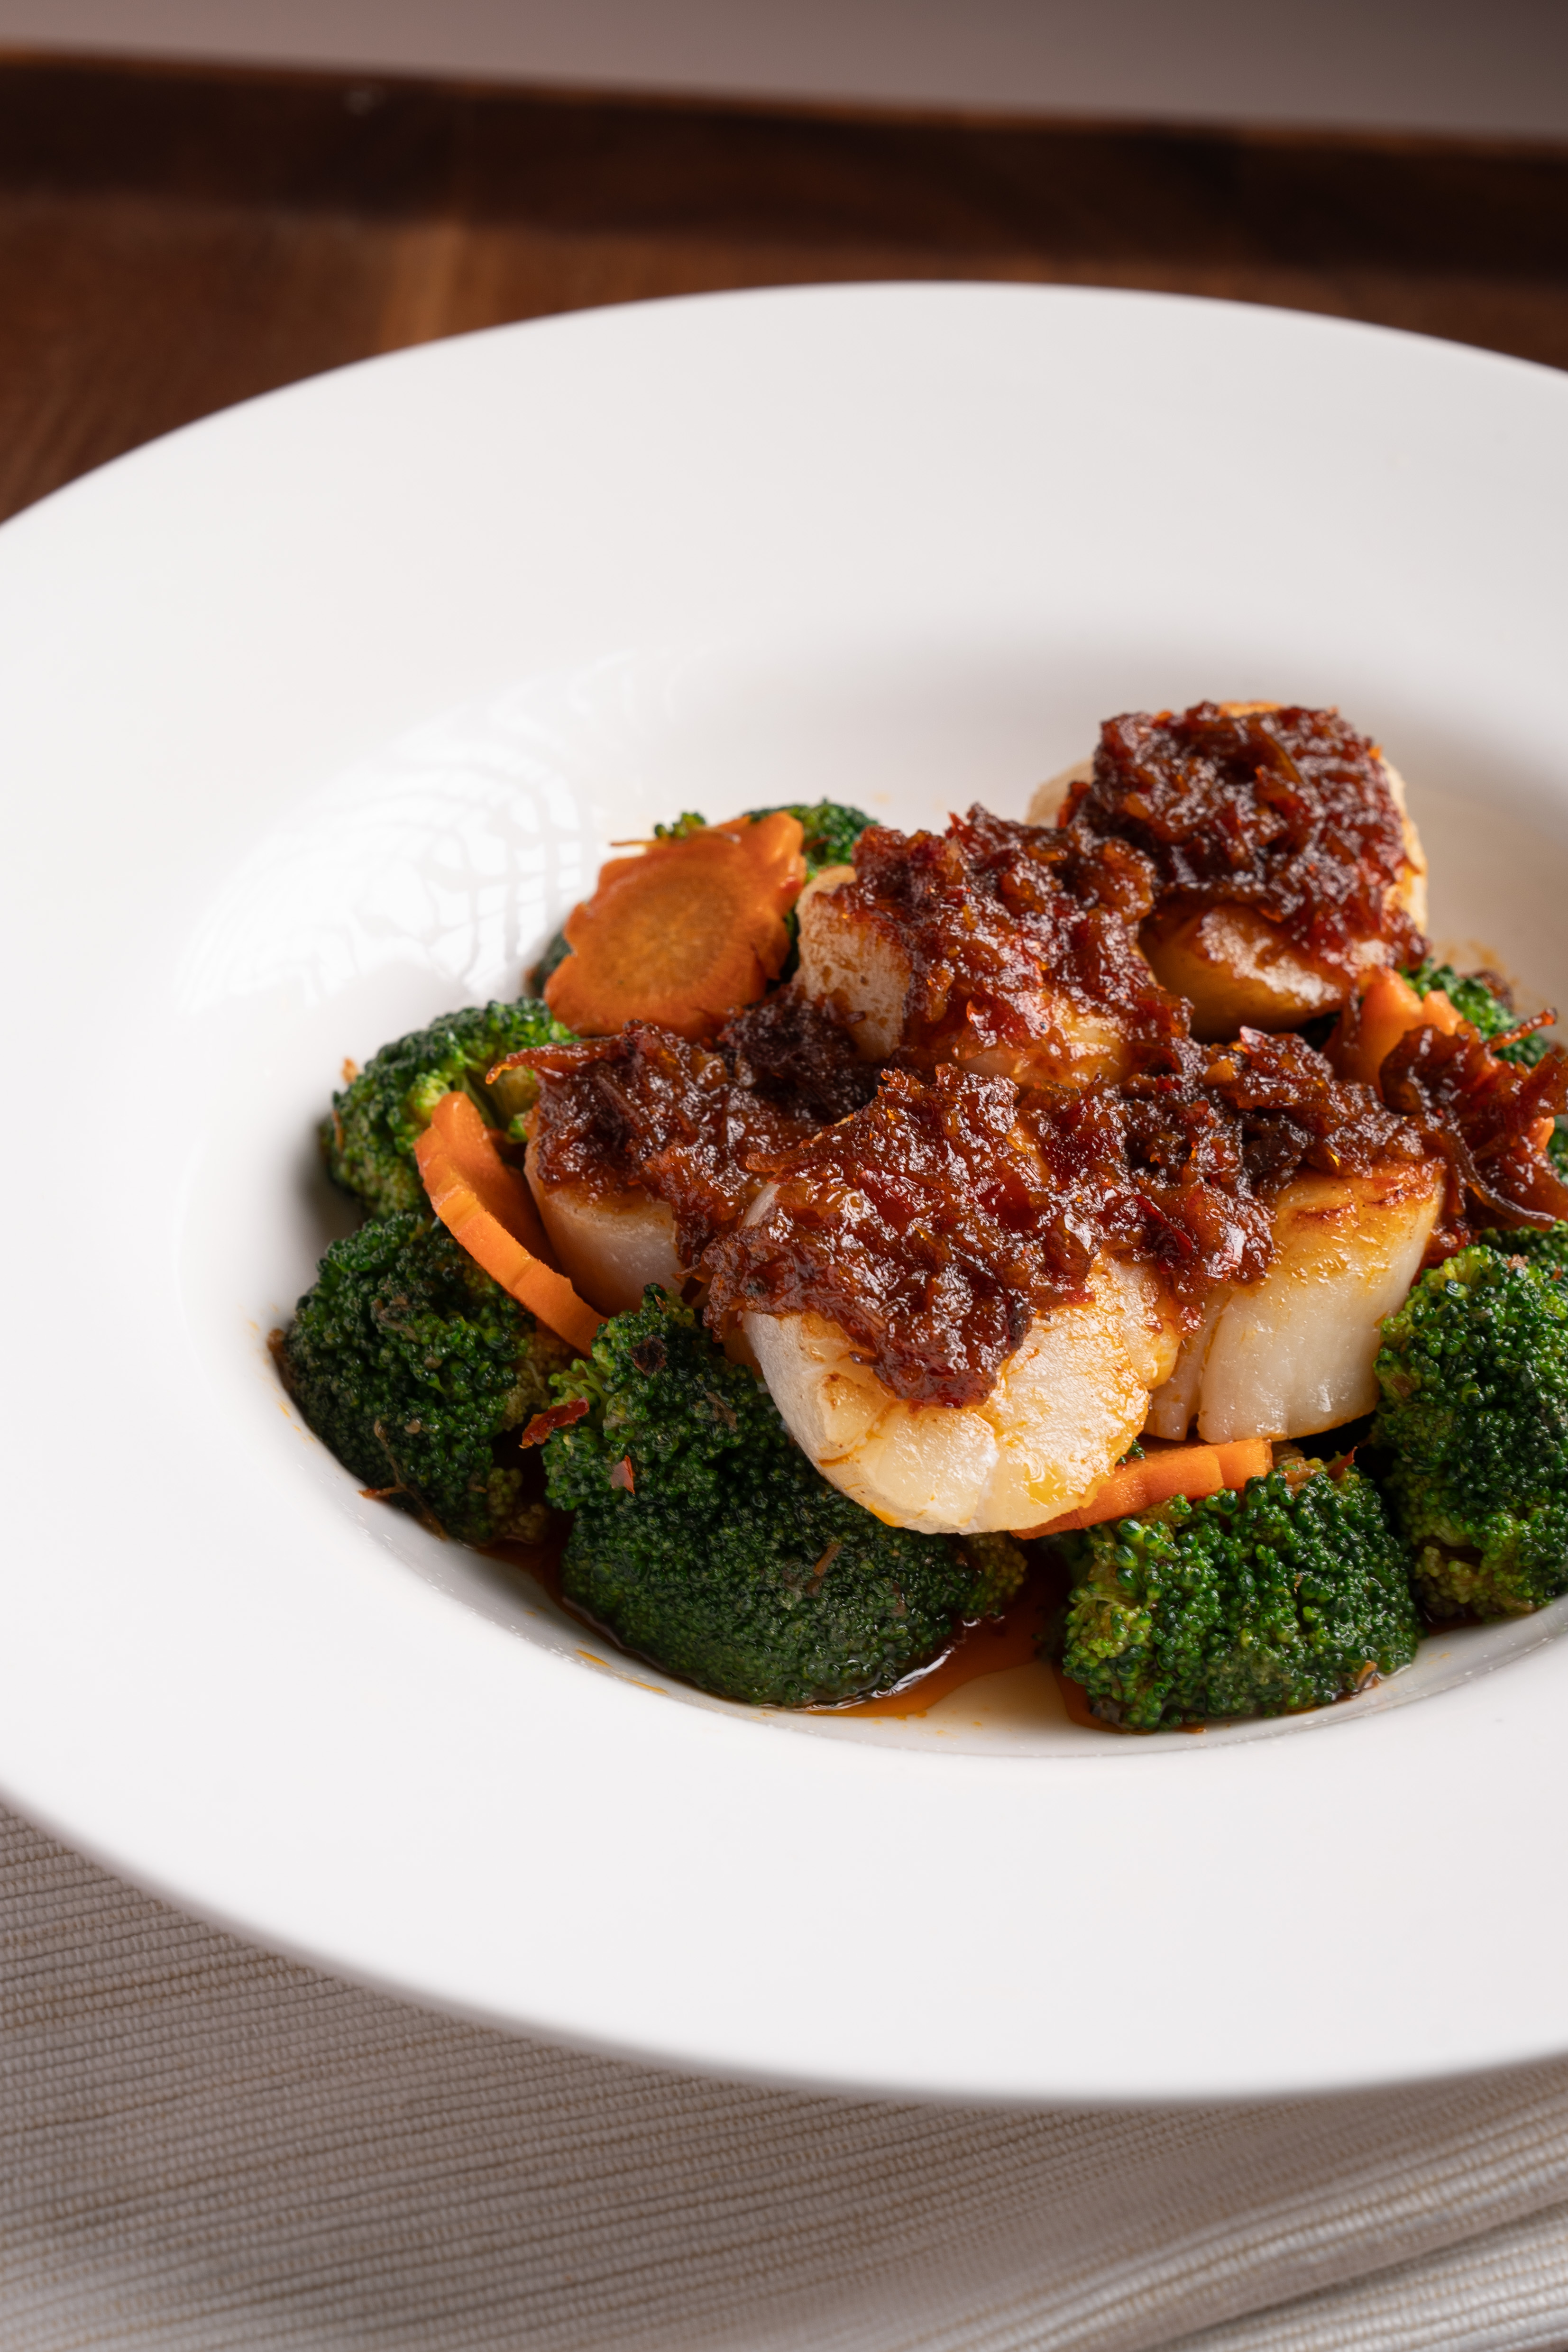 SCALLOP WITH XO SAUCE